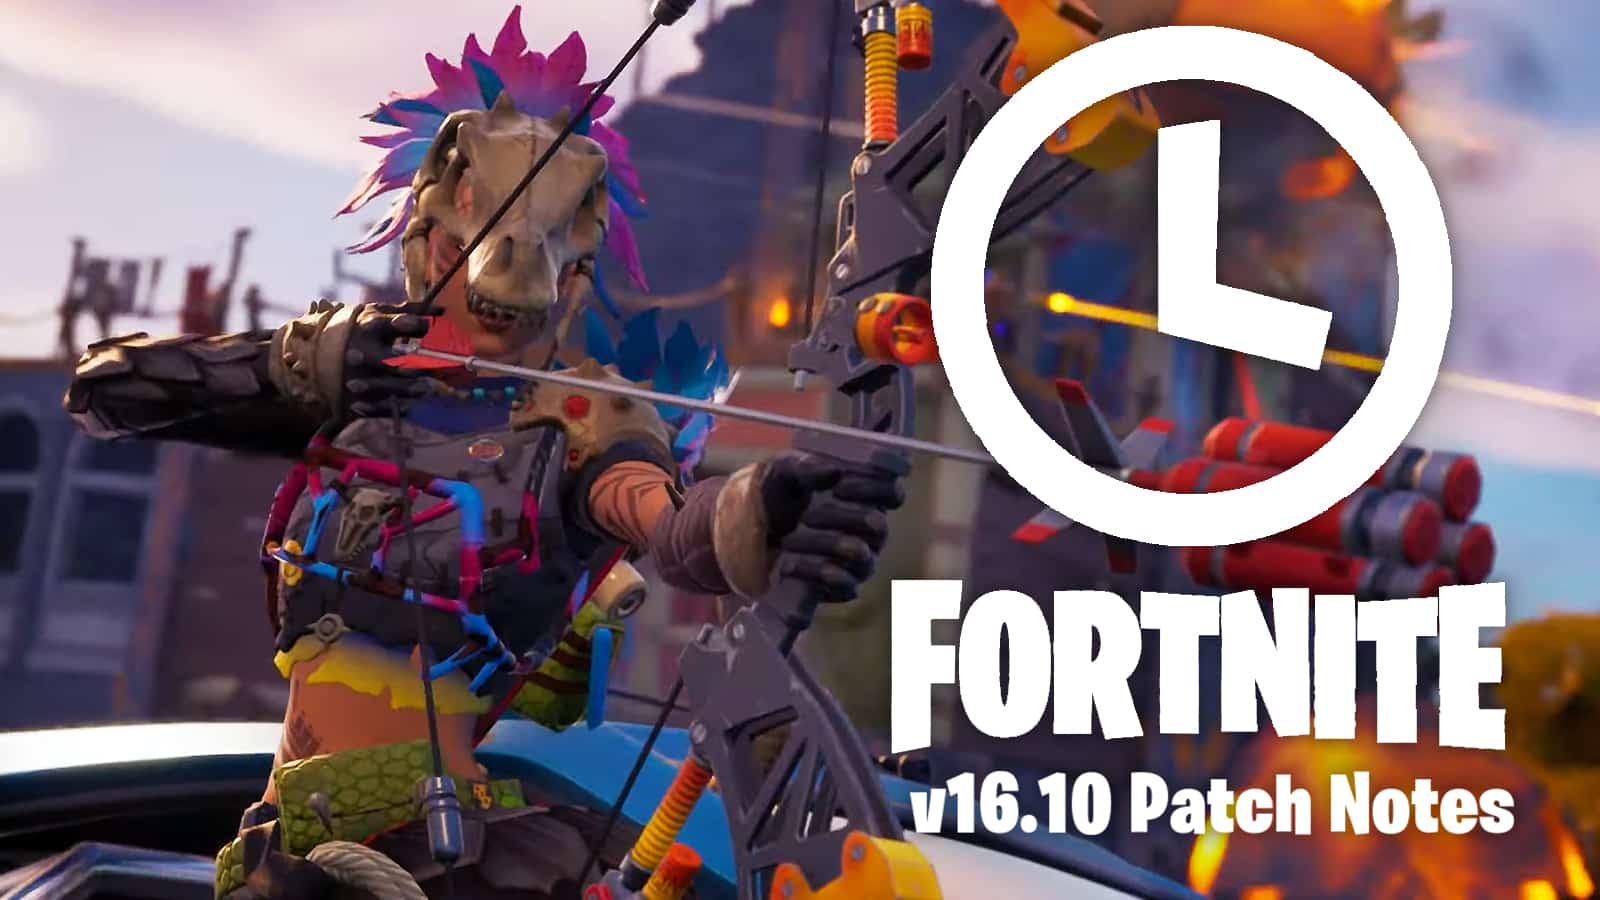 Fortnite update 16.10 patch notes.